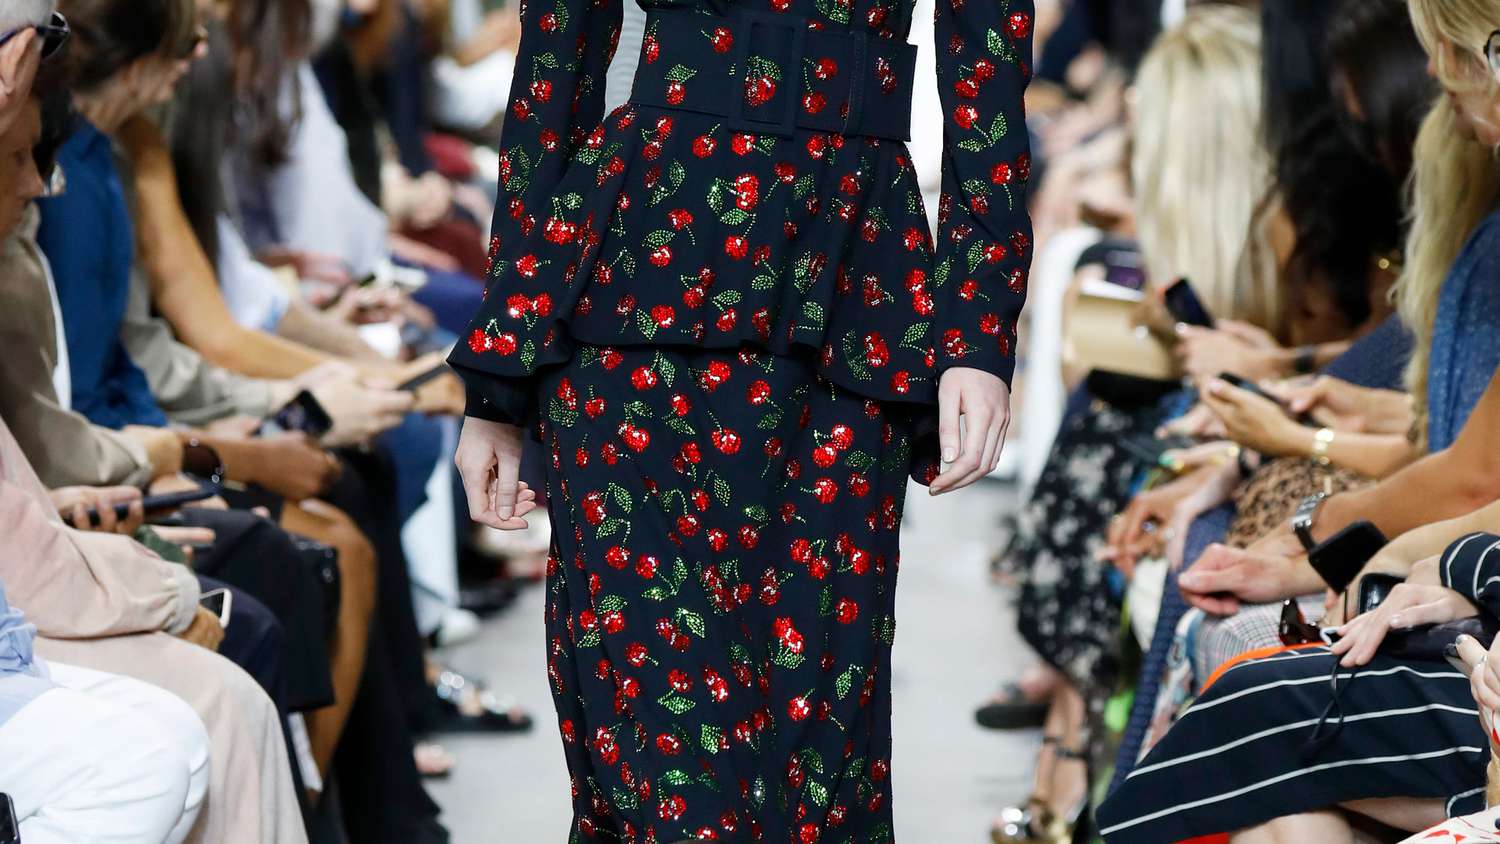 Michael Kors Collection Spring 2020 Runway Show